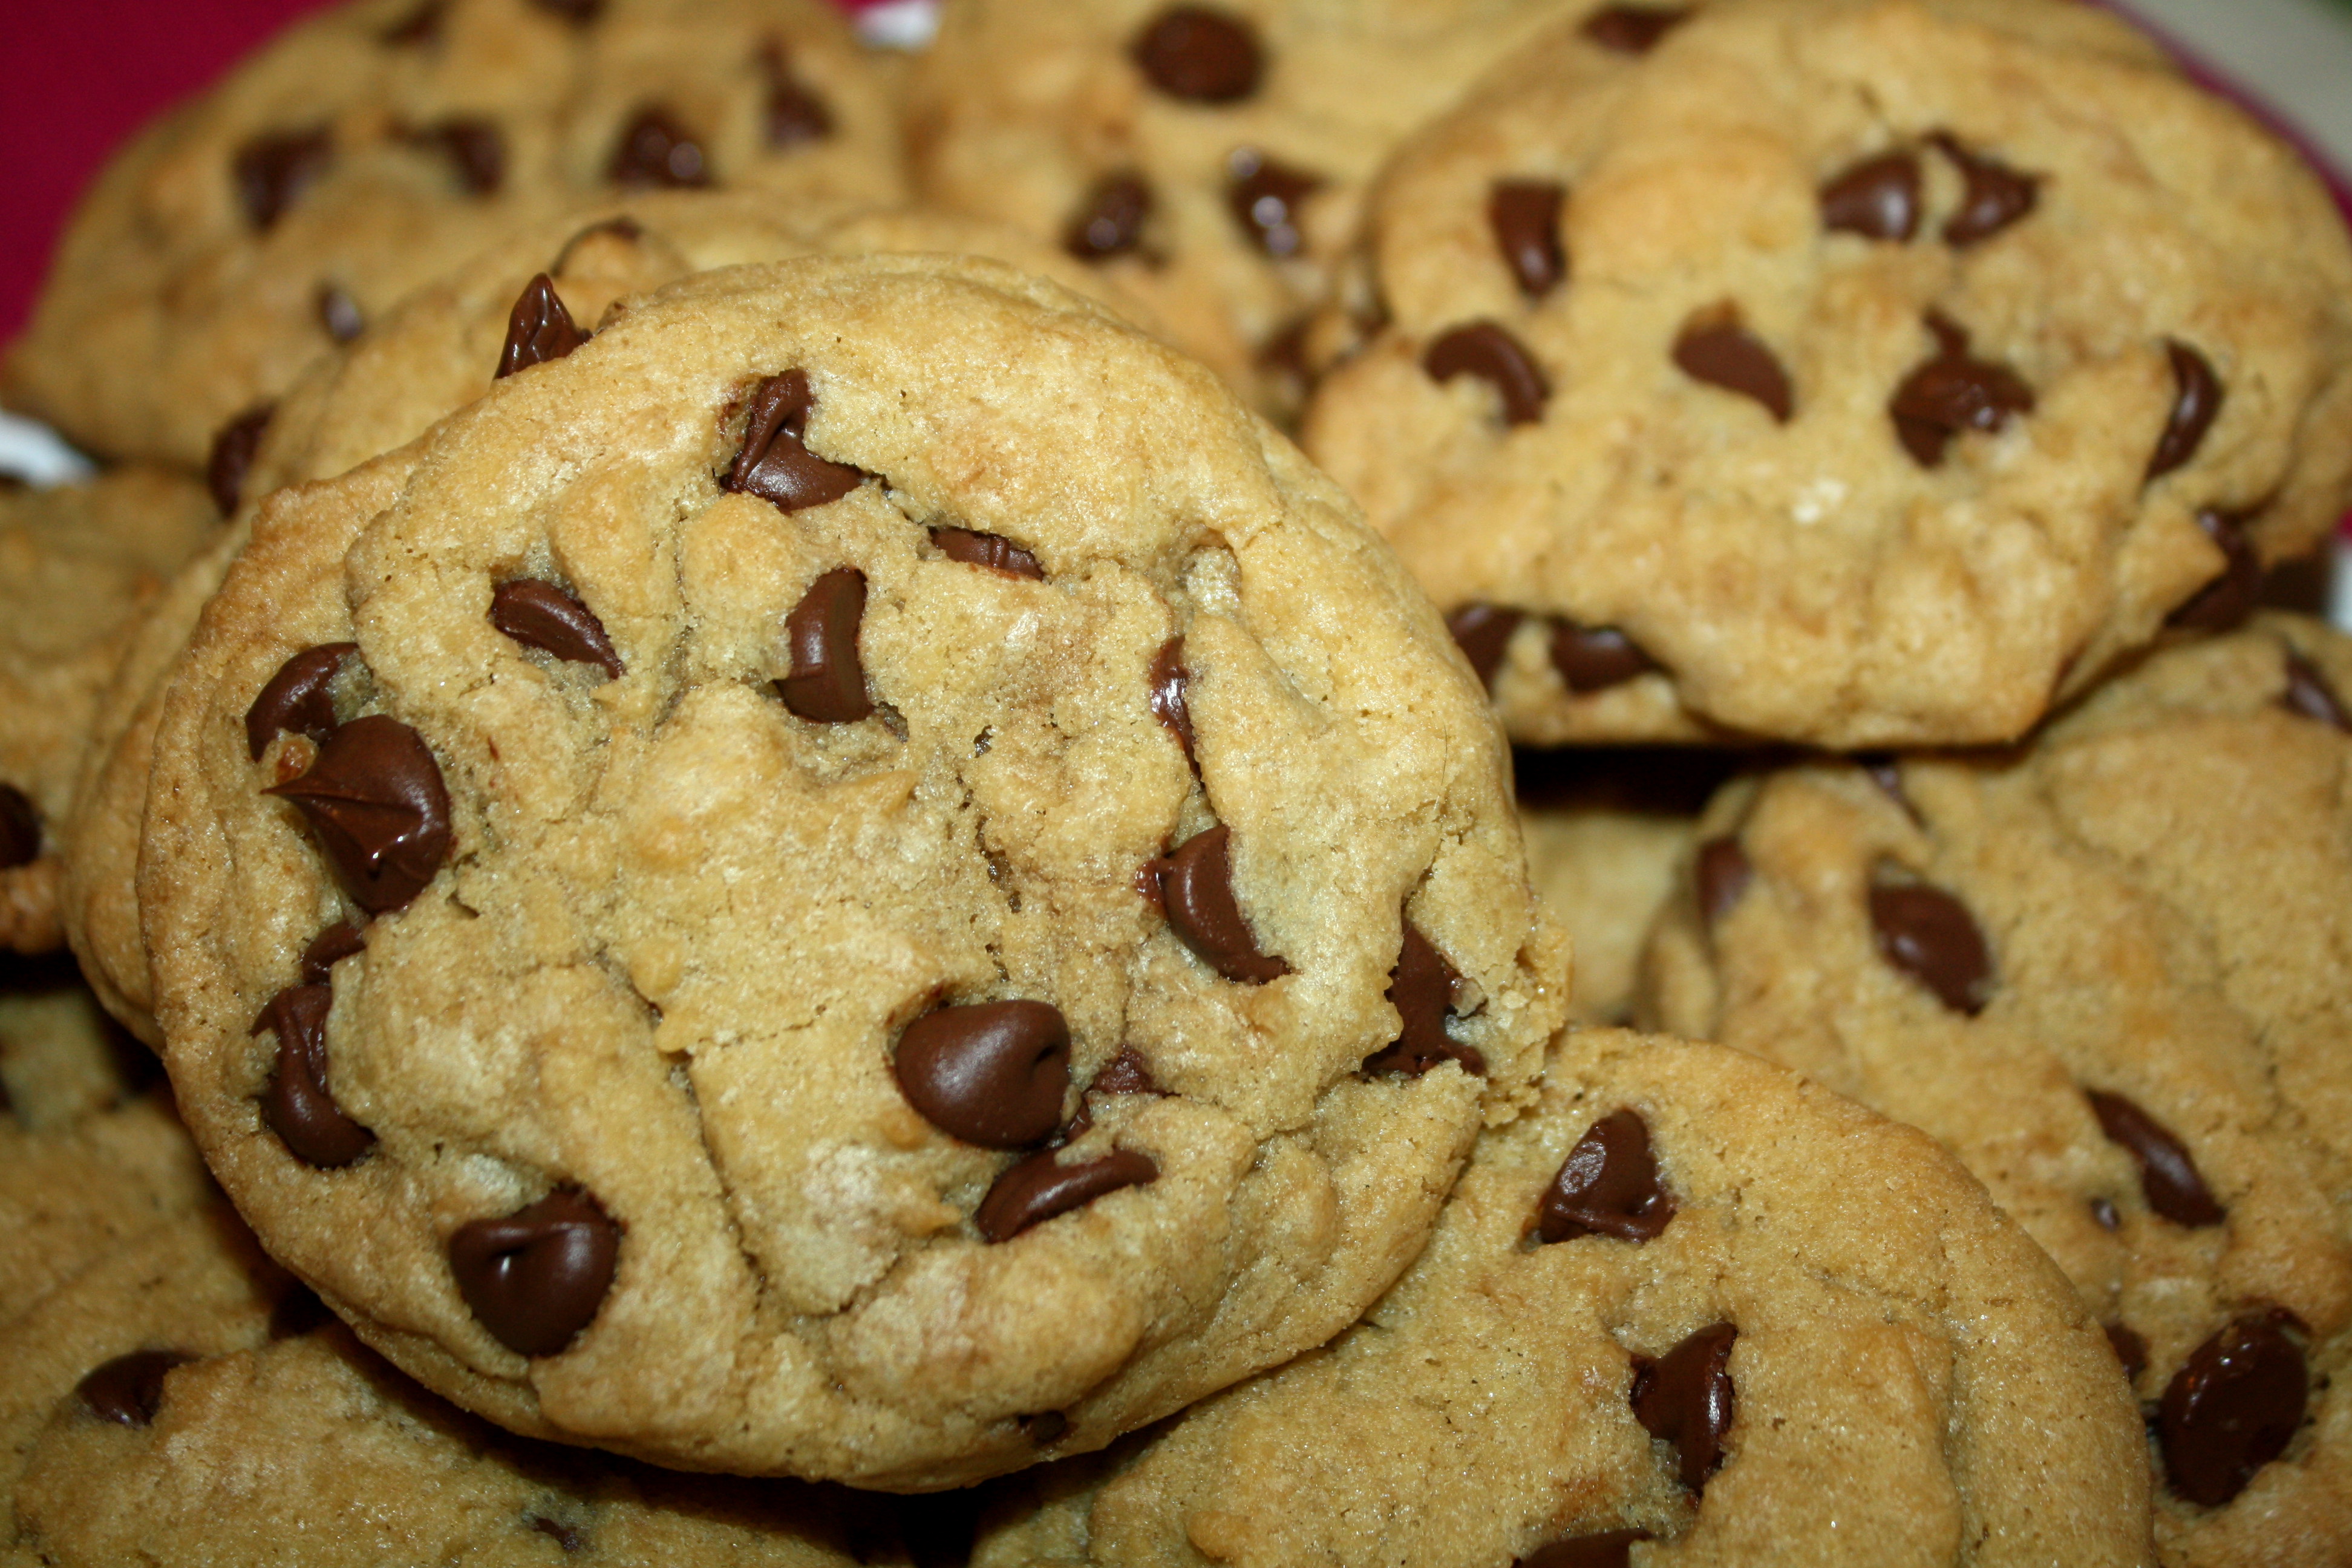 Baking cookies is always a good idea. Source:http://thequotablekitchen.com/thick-chewy-chocolate-chip-cookies/